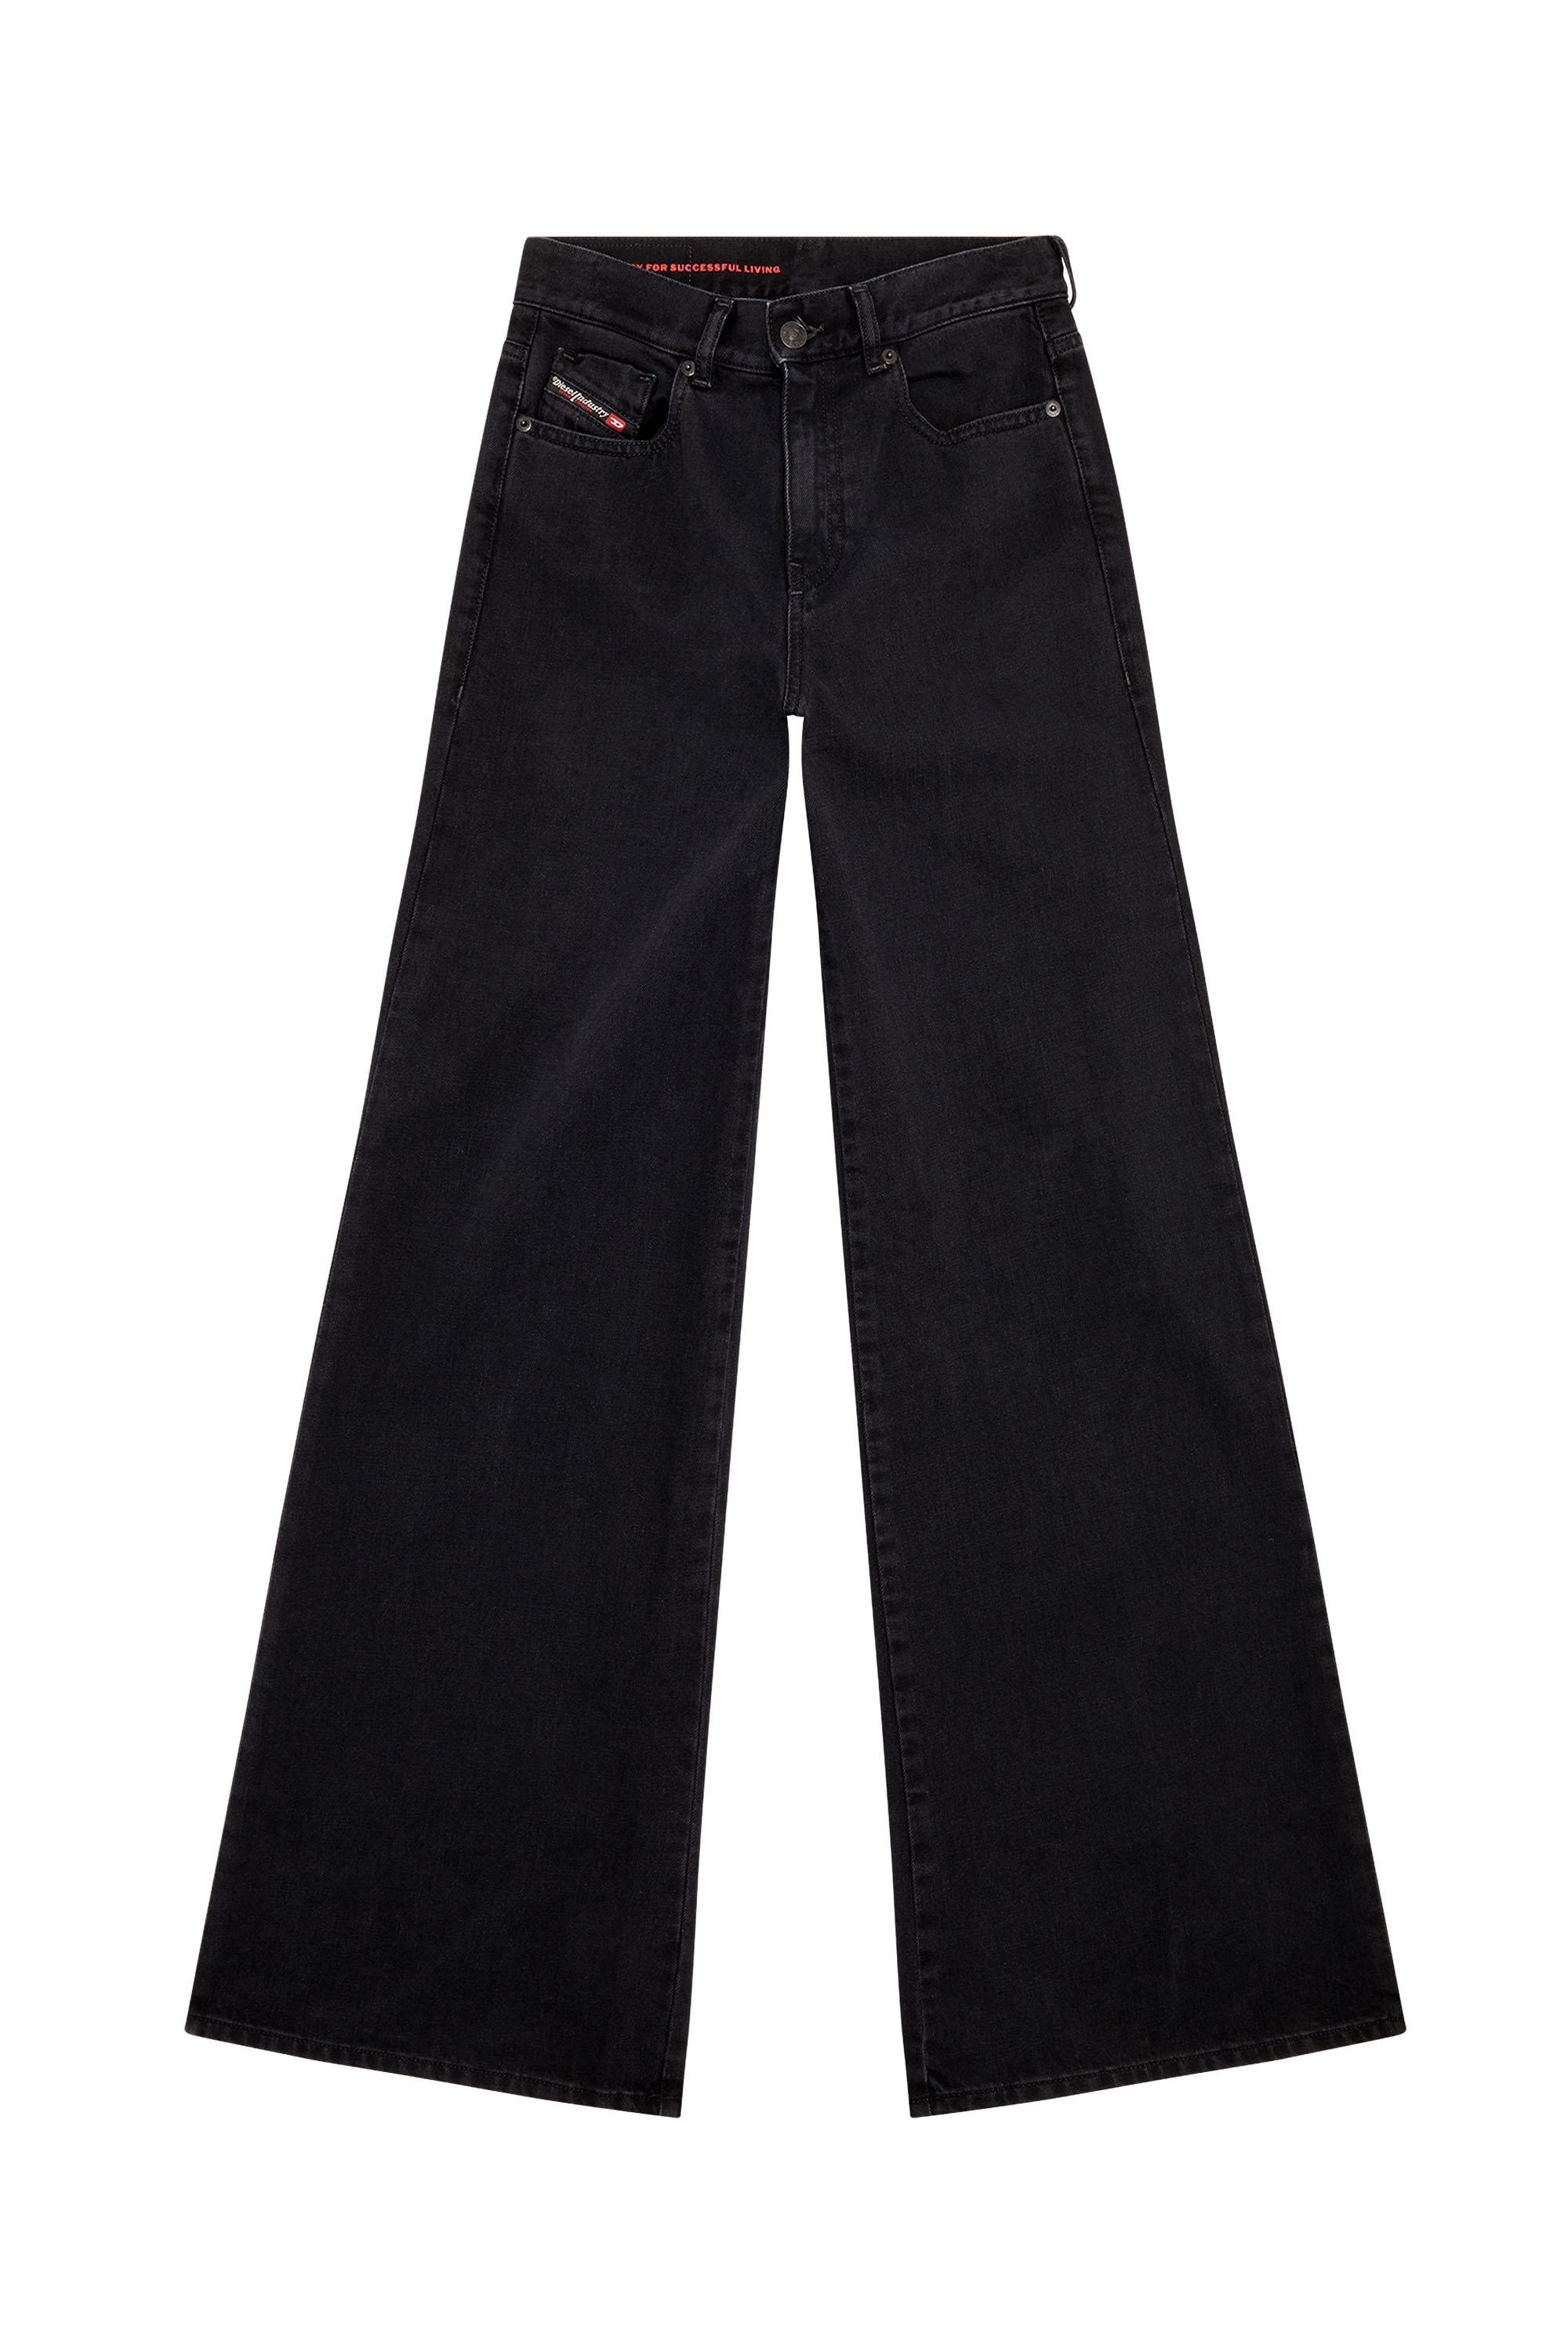 1978 Z09RL Bootcut and Flare Jeans, Black/Dark grey - Jeans